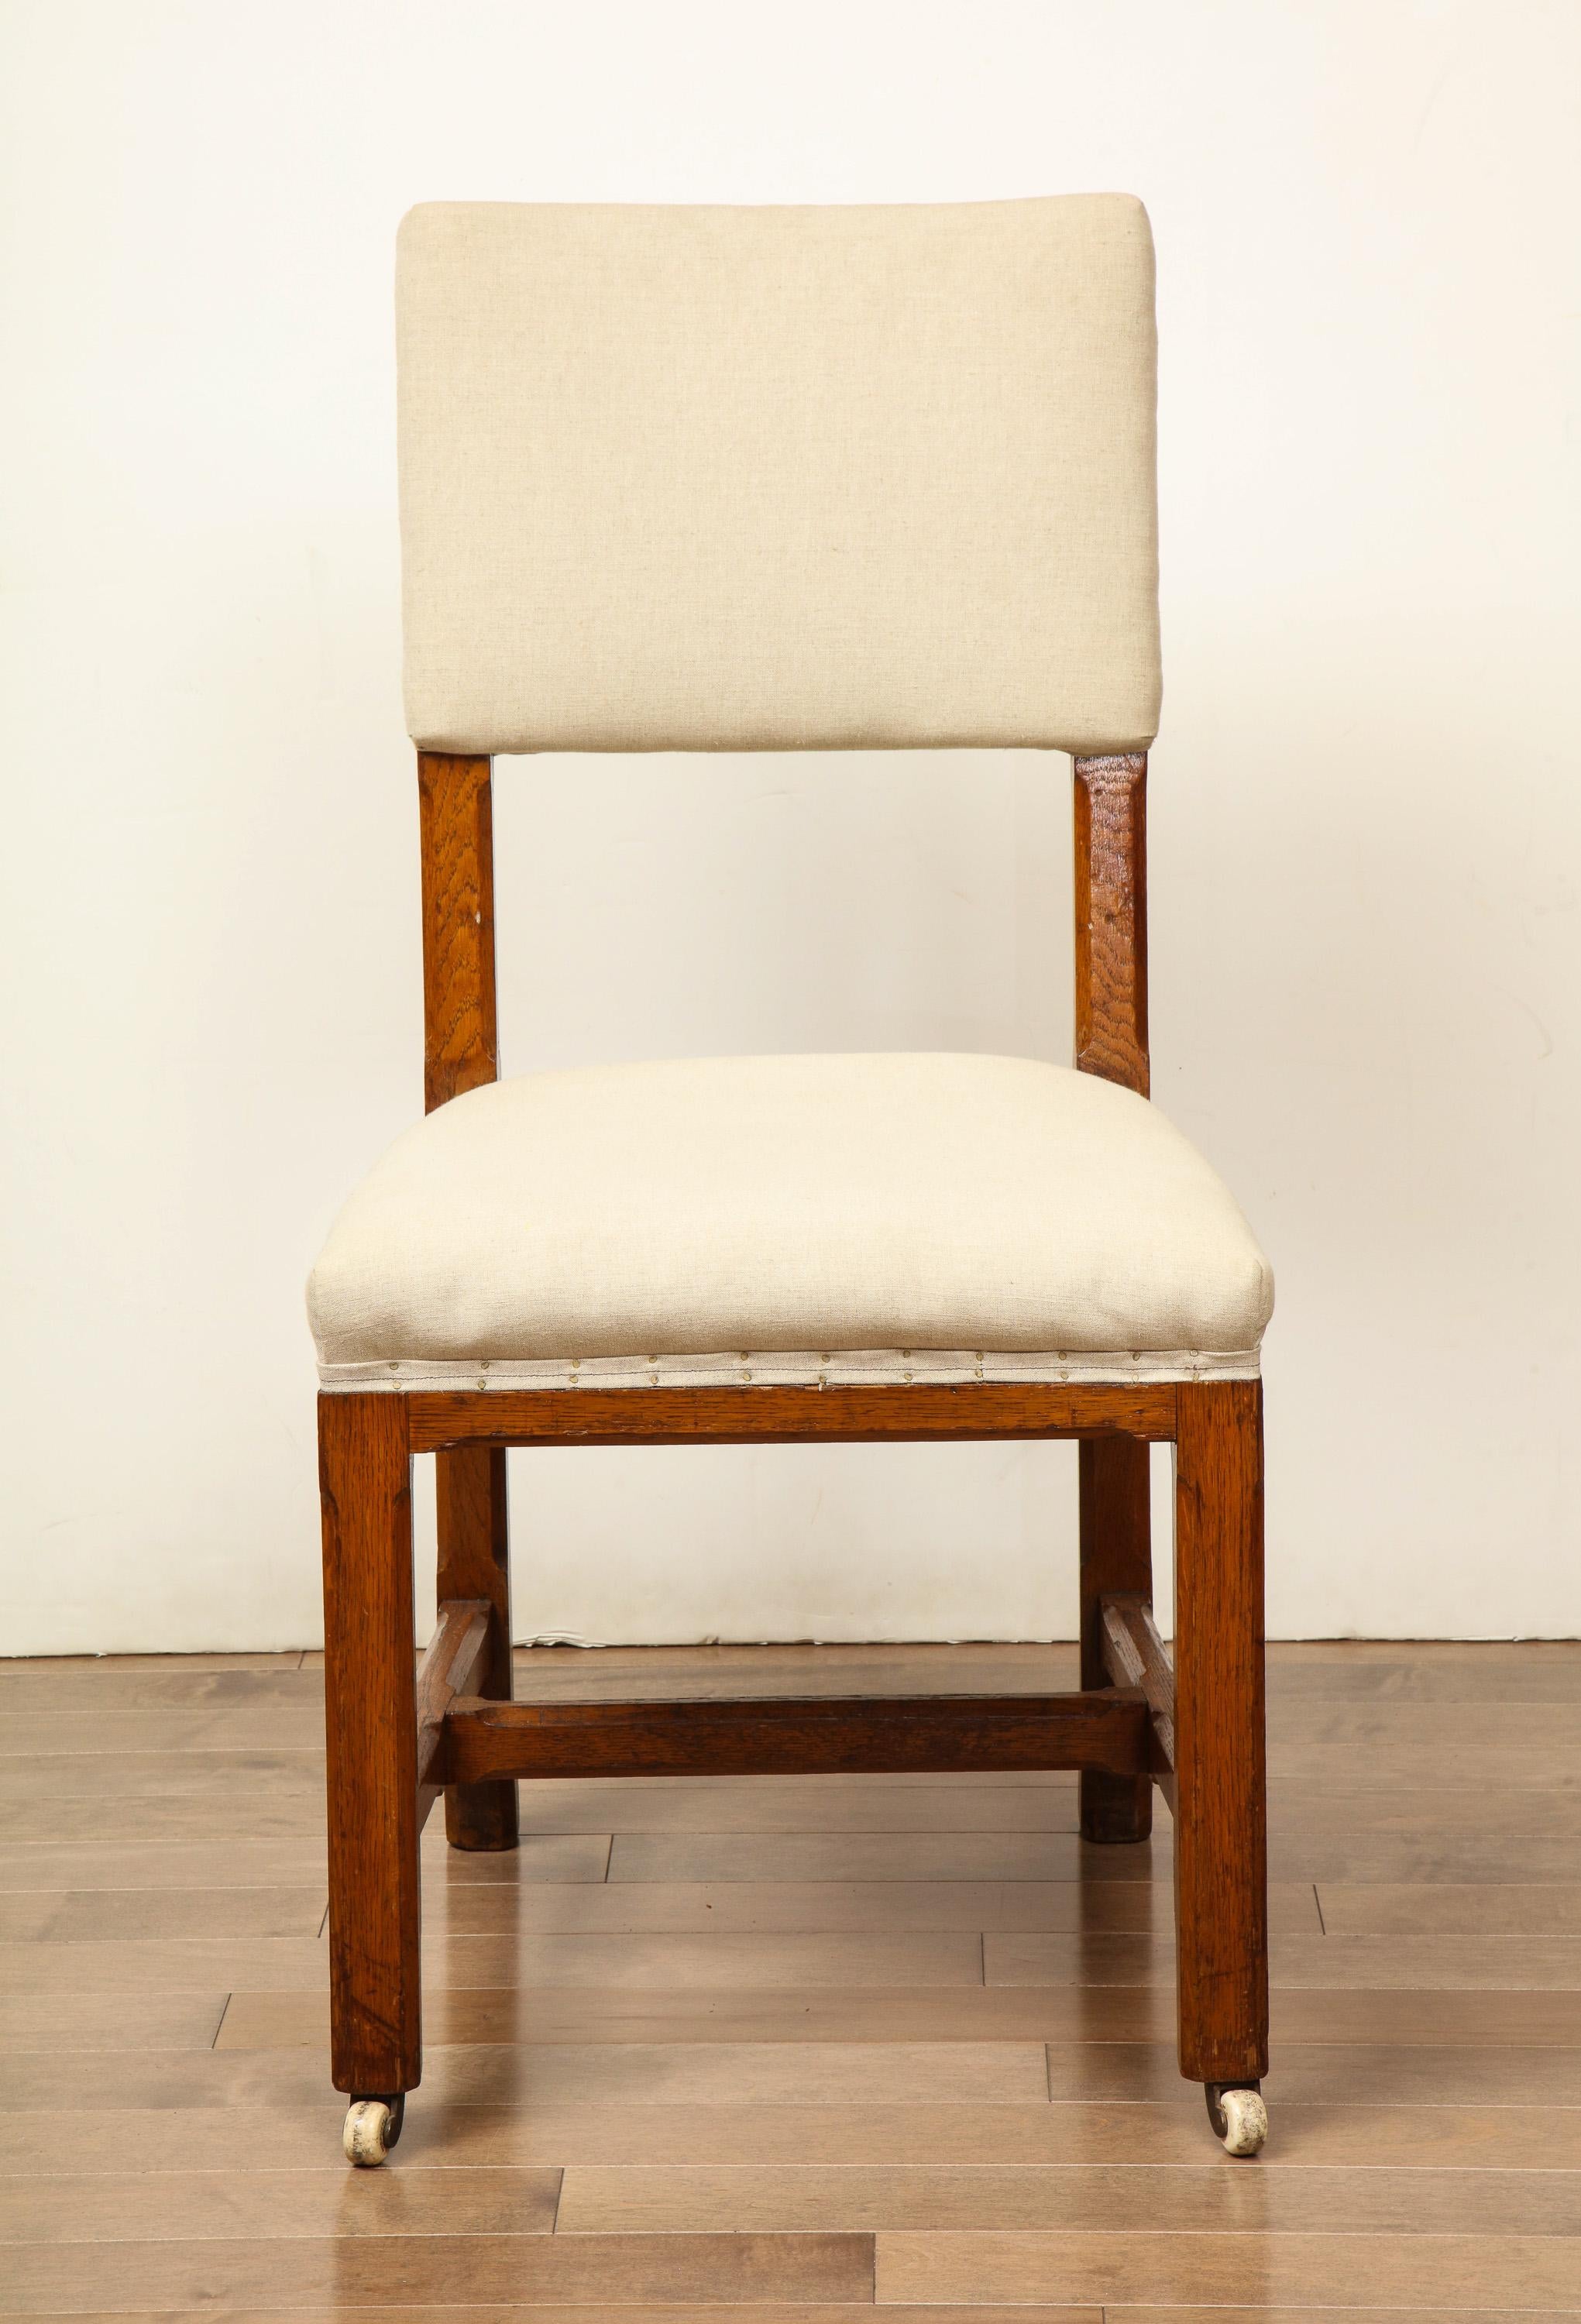 Mid-19th century English side chair in oak.
Stamped Gillow with a paper label “Balls Oxford Street”
In the manner of Pugin.